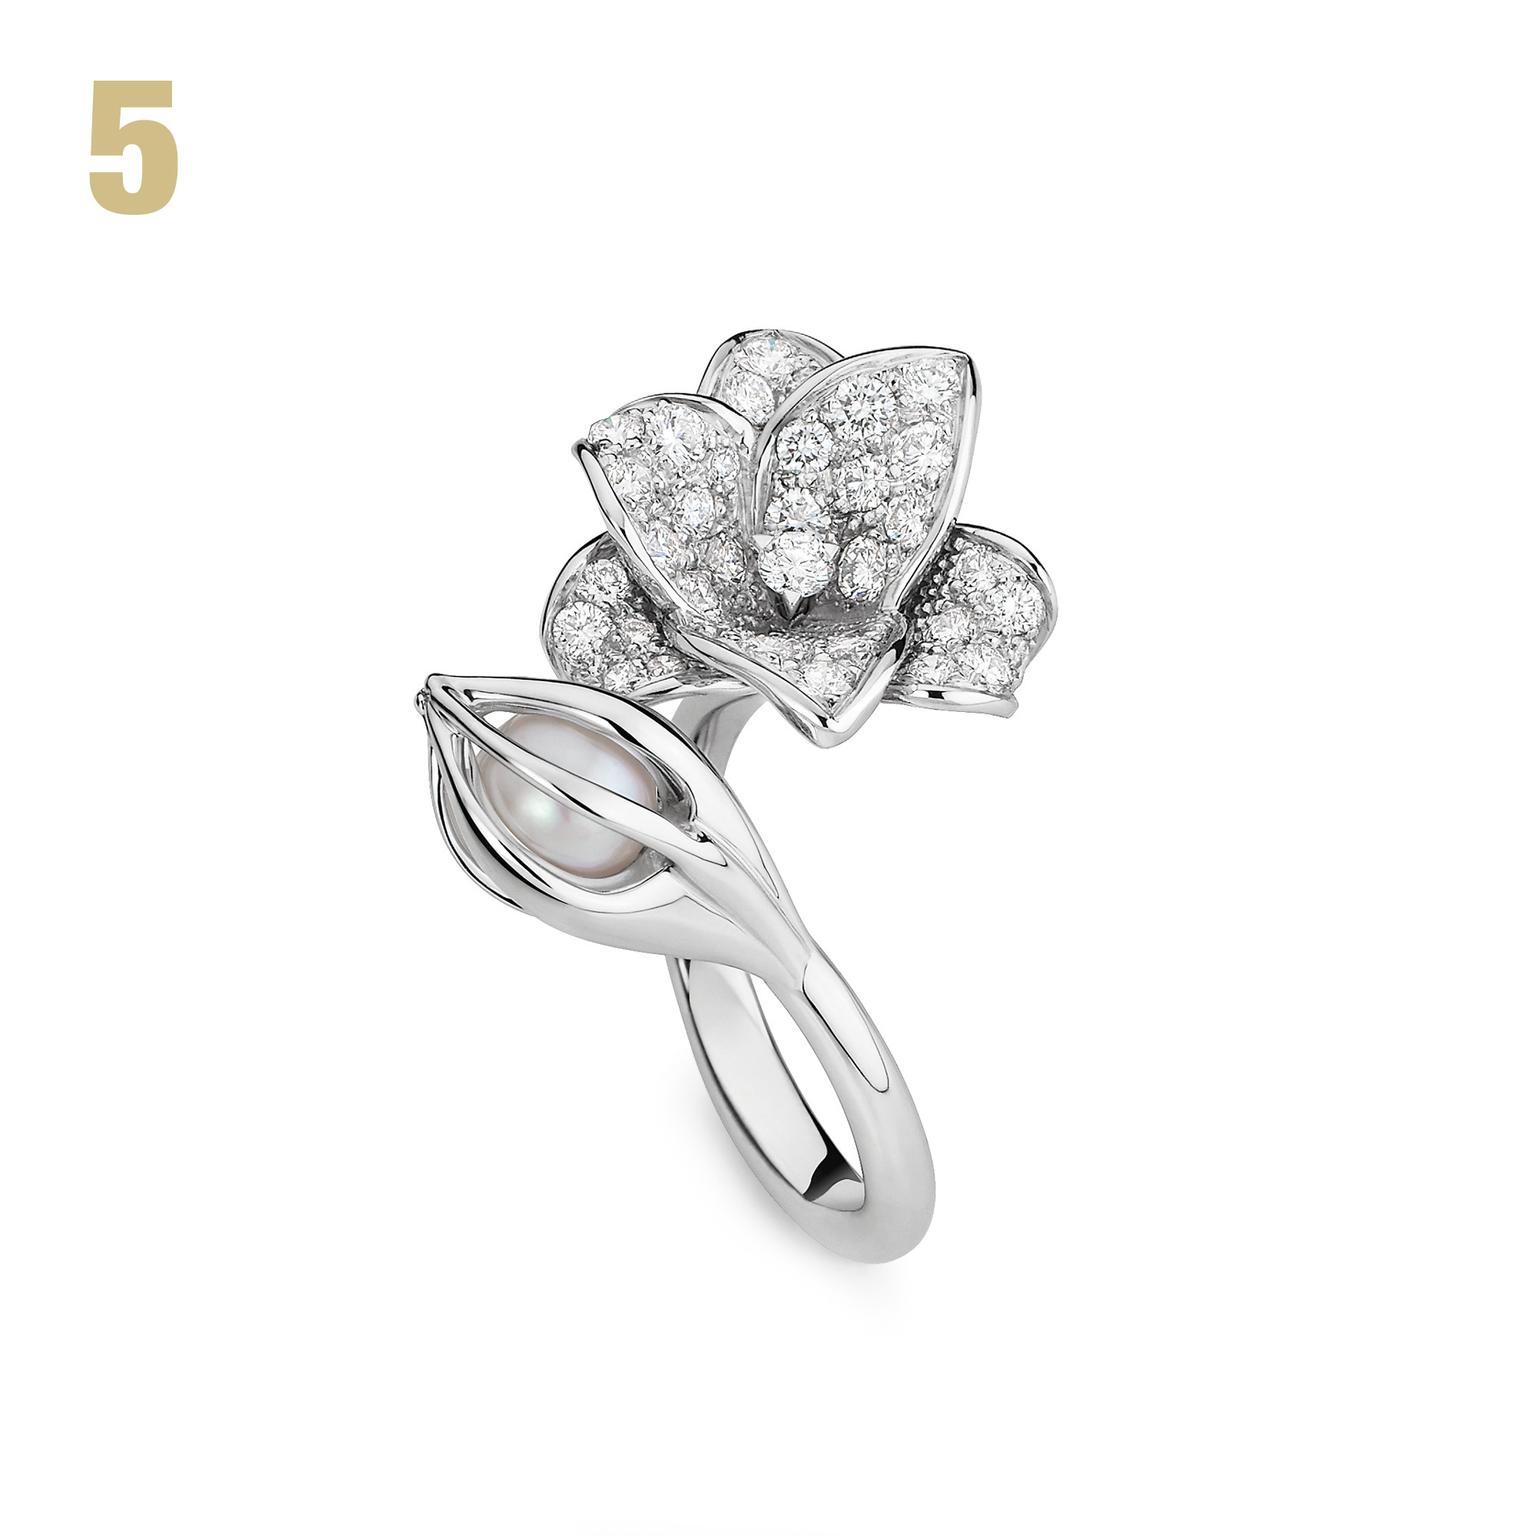 Mellerio dits Meller diamond and pearl ring